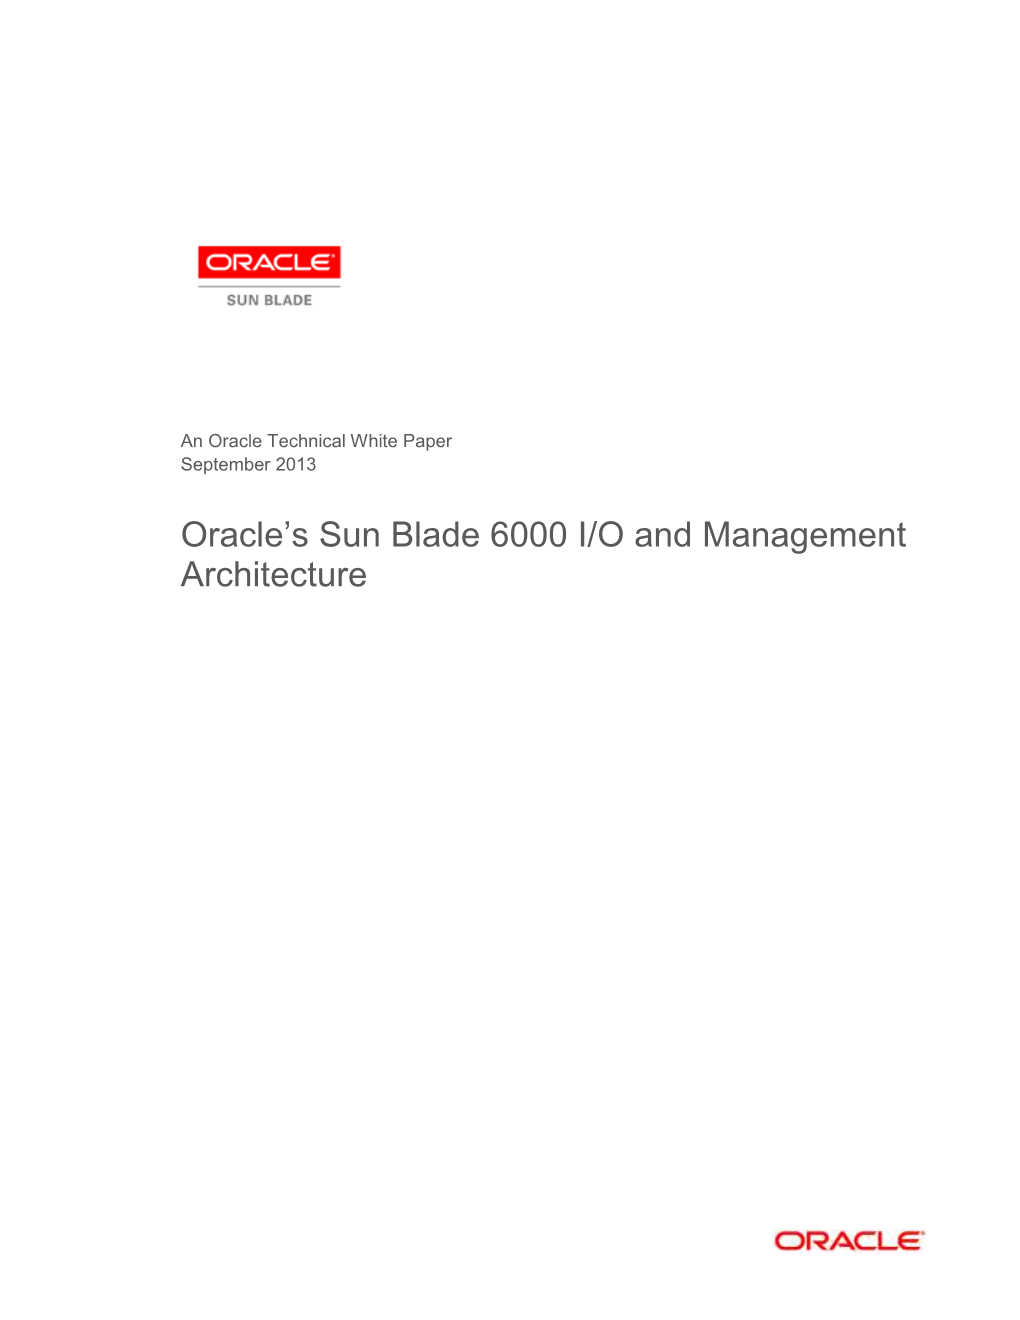 Sun Blade 6000 I/O and Management White Paper